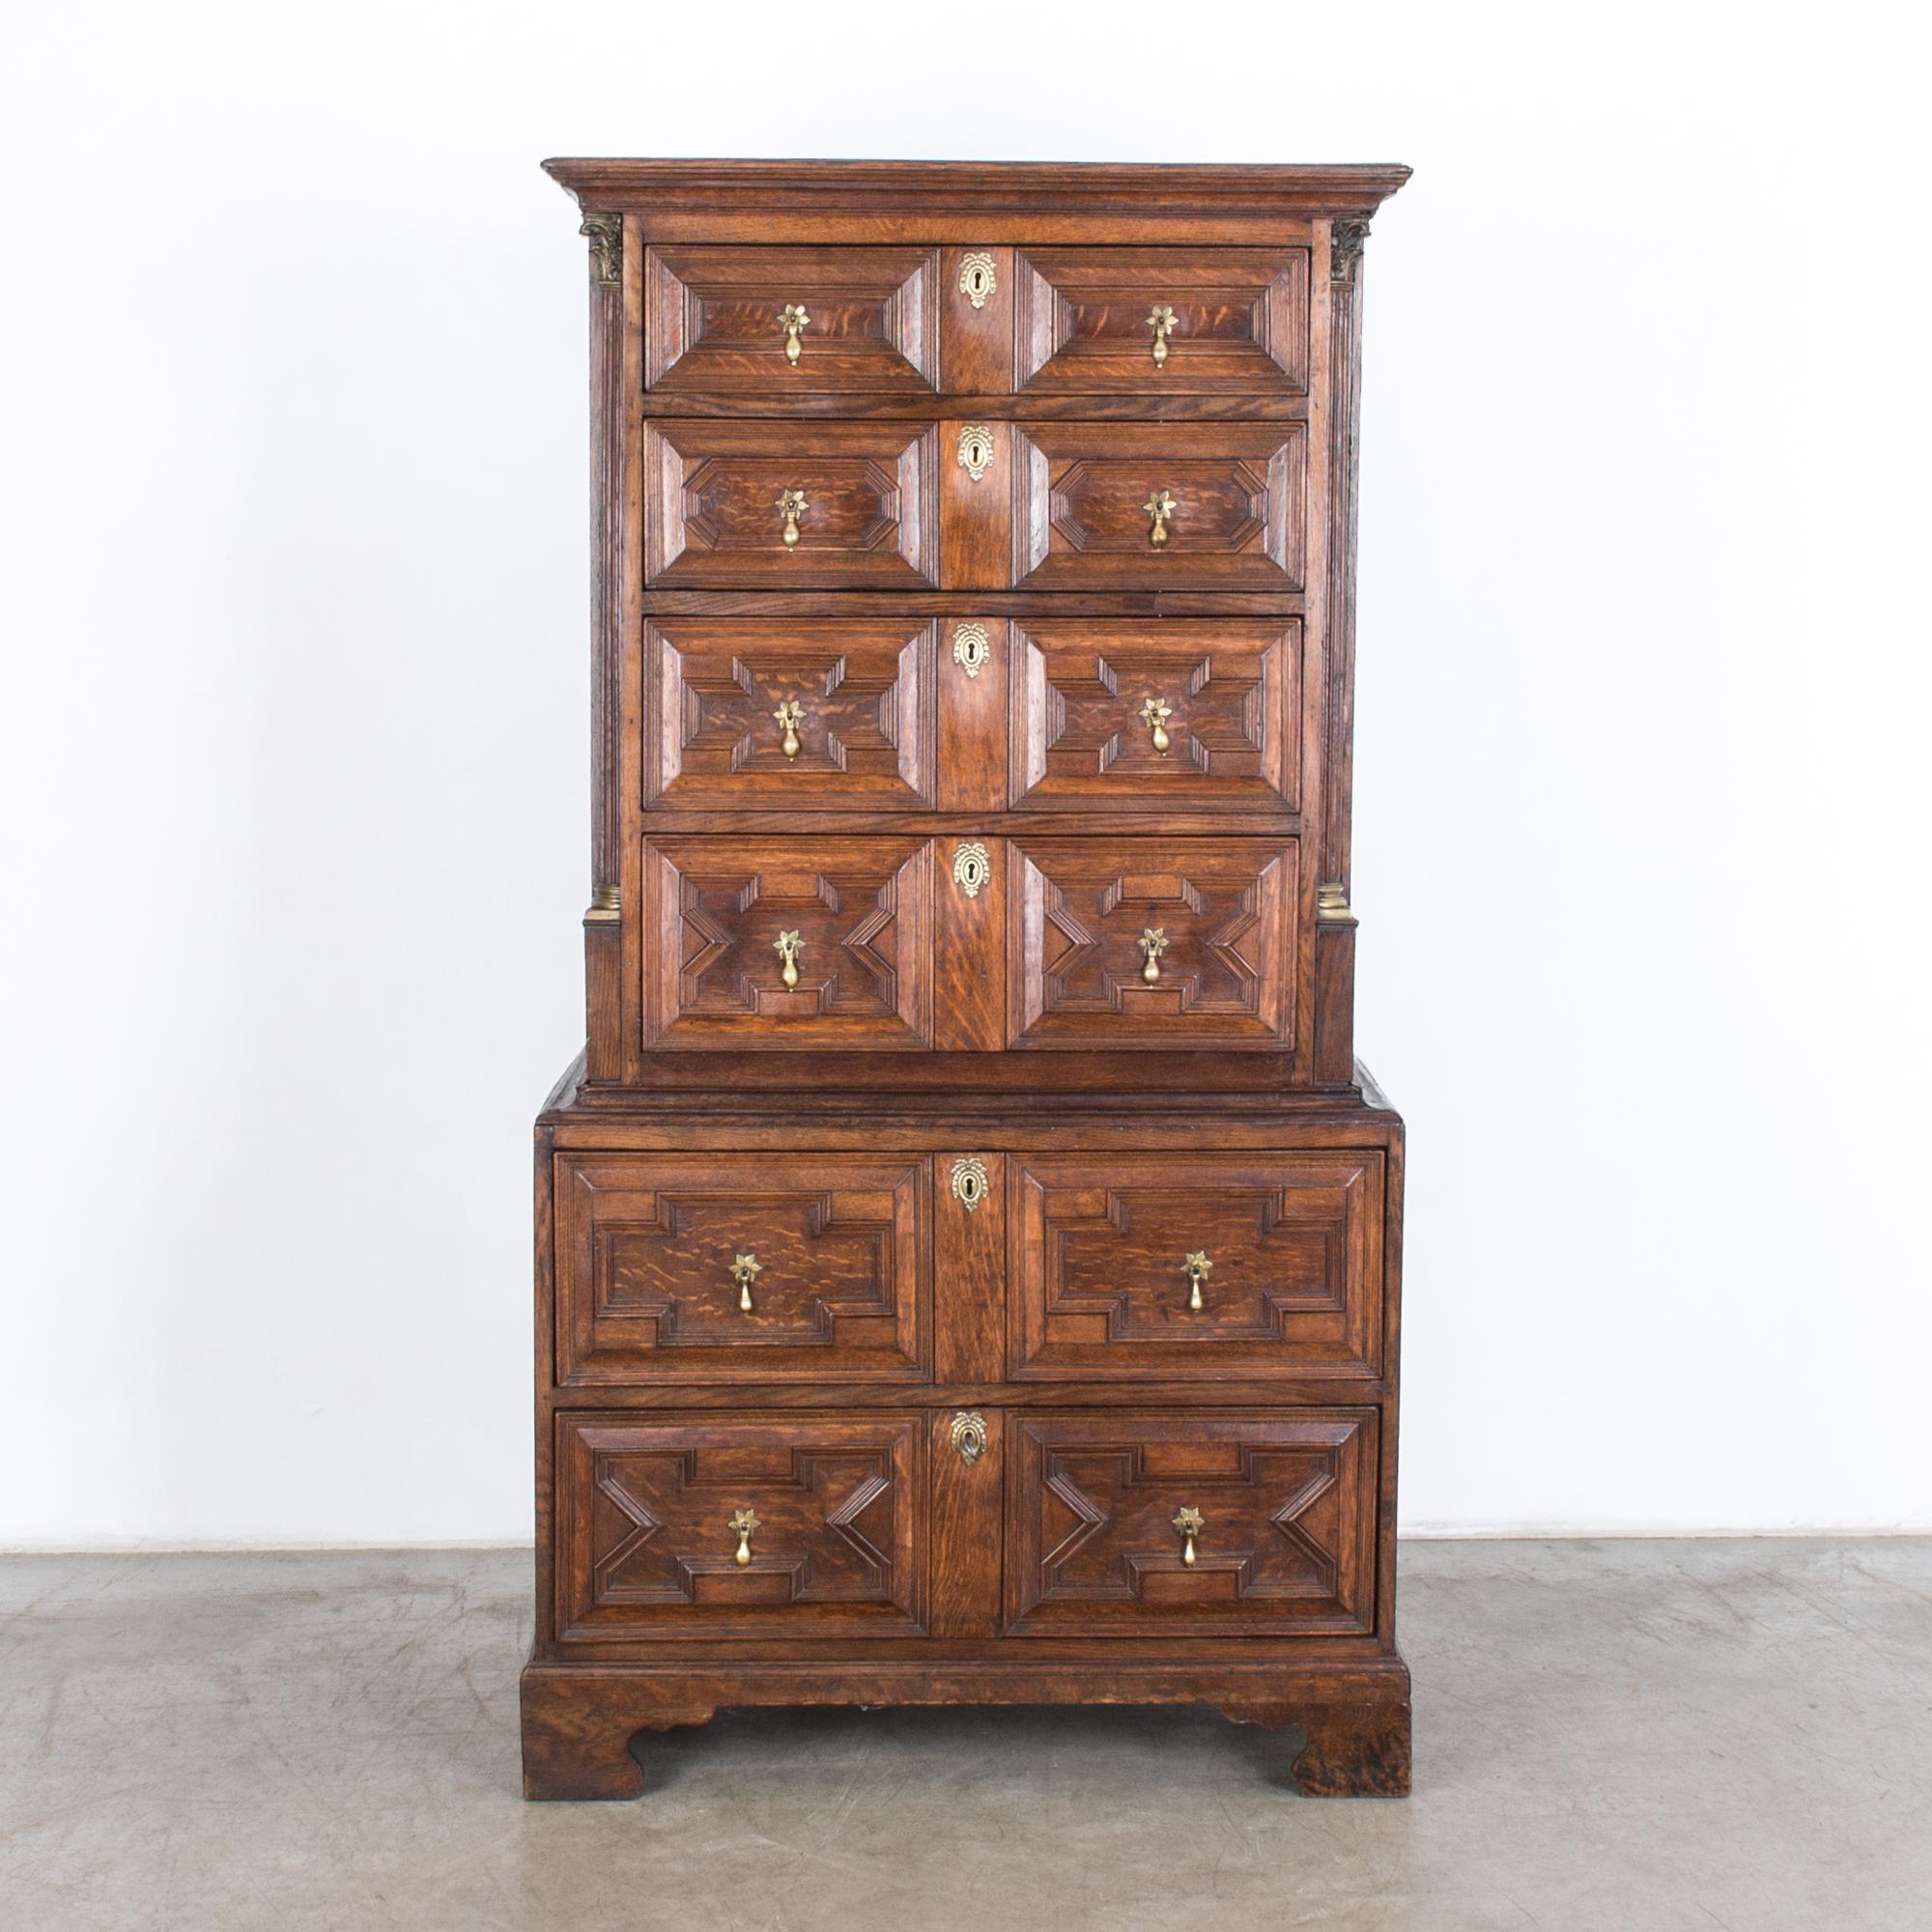 A tall dresser drawer cabinet from the UK, circa 1900. Fantastic quality in a simple and elegant neoclassical style. A typical Regency style piece rendered in rich textured oak; the original finish has been restored and stabilized in our atelier.